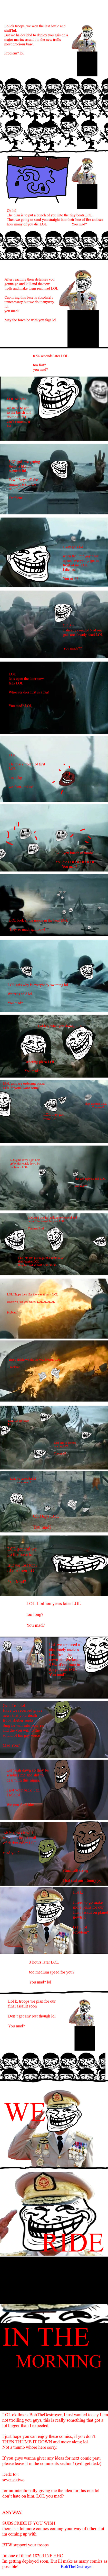 Troll WAR pt. 3 (see part 1 first). LORD OF THE TROLLS COMIC HERE!&lt;br /&gt; &lt;a href=&quot;pictures/1356237/LORD+OF+THE+TROLLS/&quot; target=blank&gt;funny